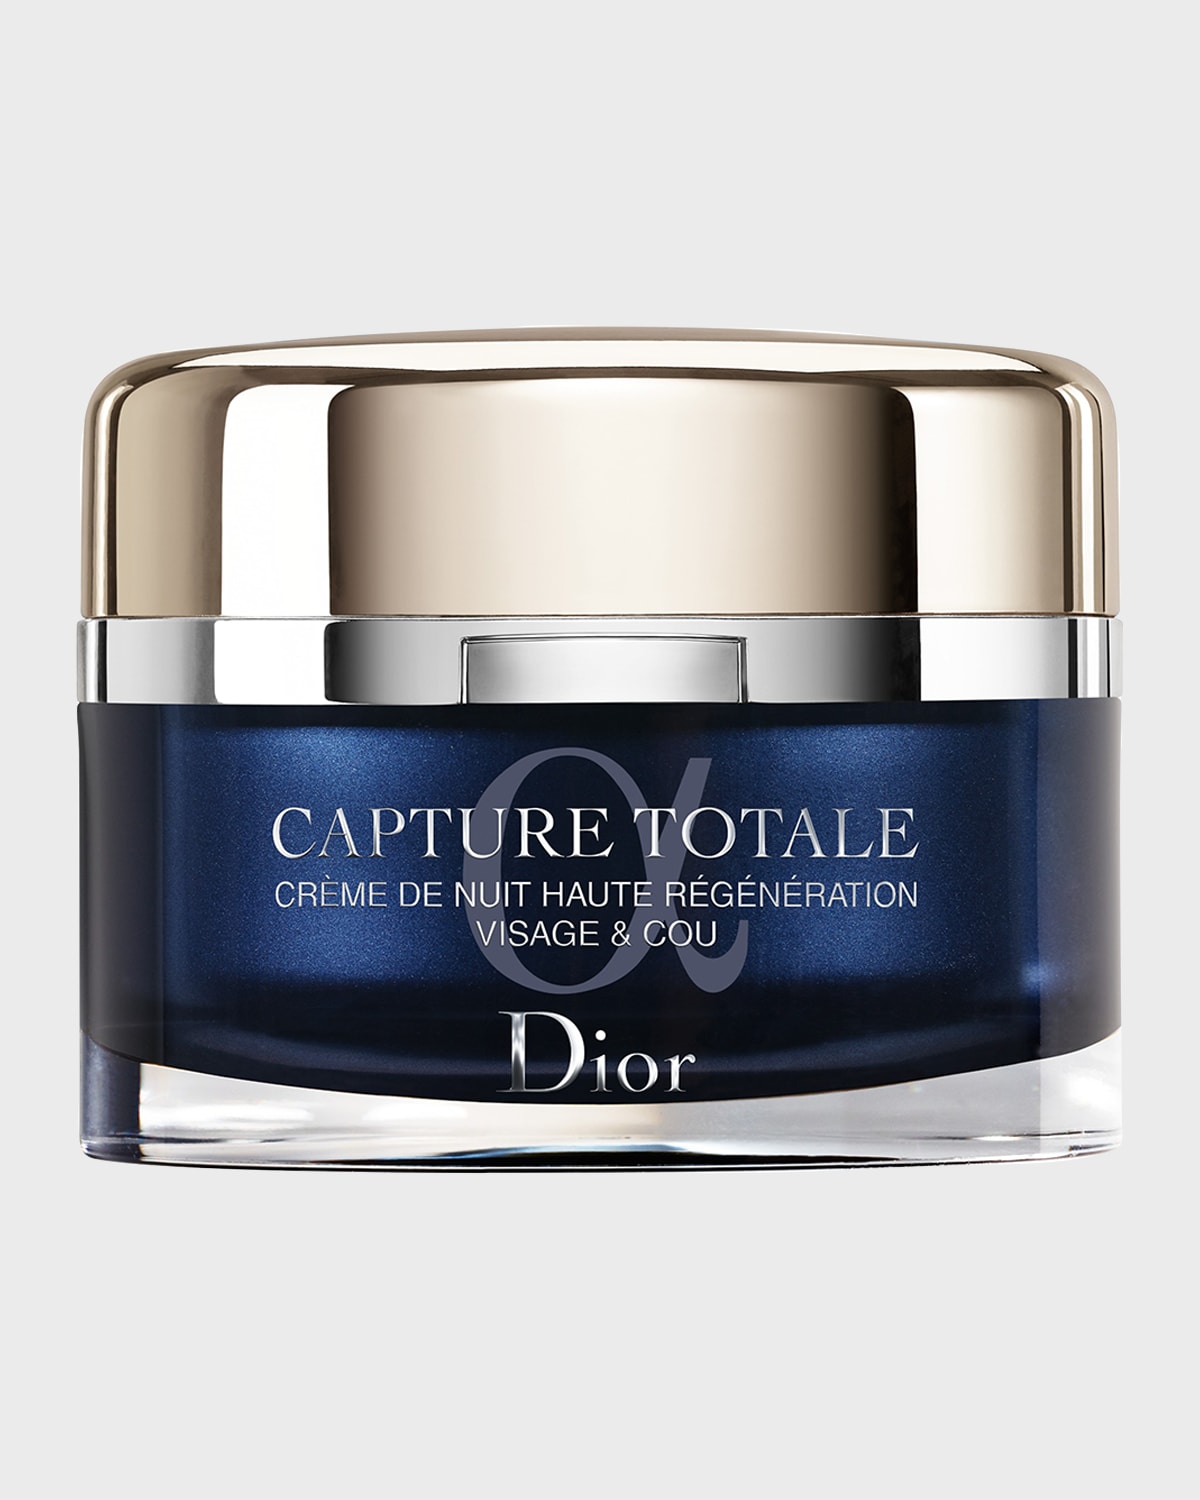 Capture Totale Intensive Restorative Night Creme for Face and Neck, 2 oz.